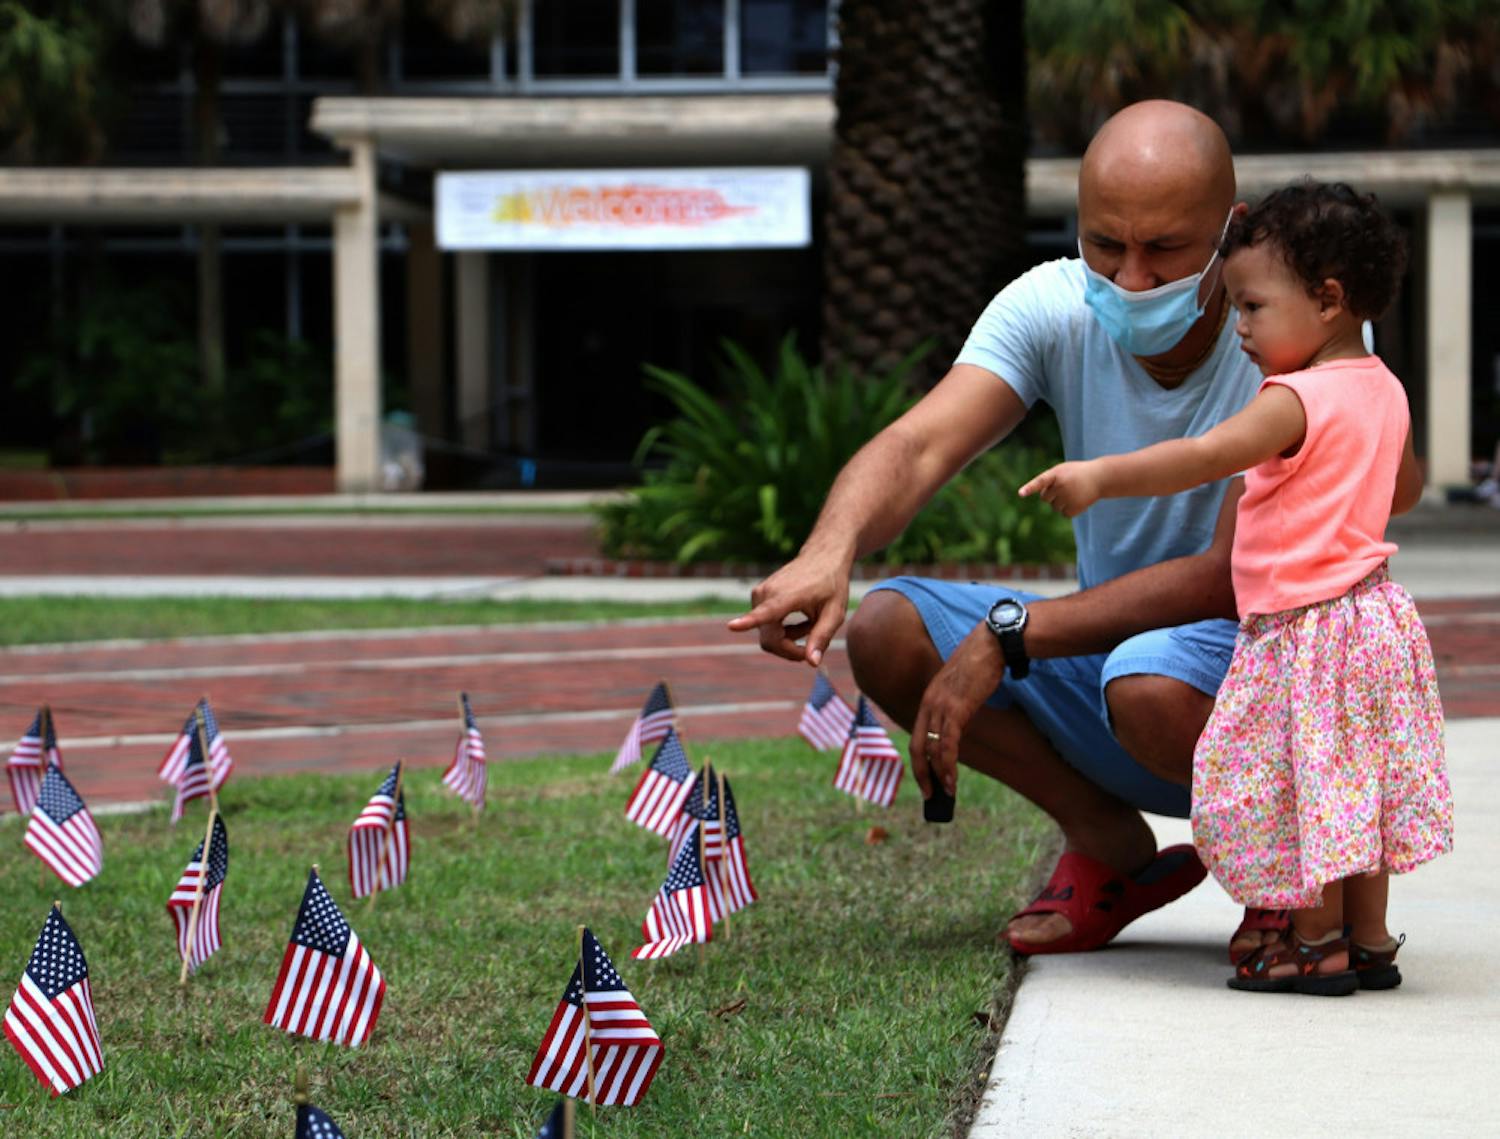 2,977 flags, a flag for each victim of the 9/11 attacks, were placed at Plaza of the Americas on September 11, 2020. The UF organization, Young Americans For Freedom placed them on Thursday night.